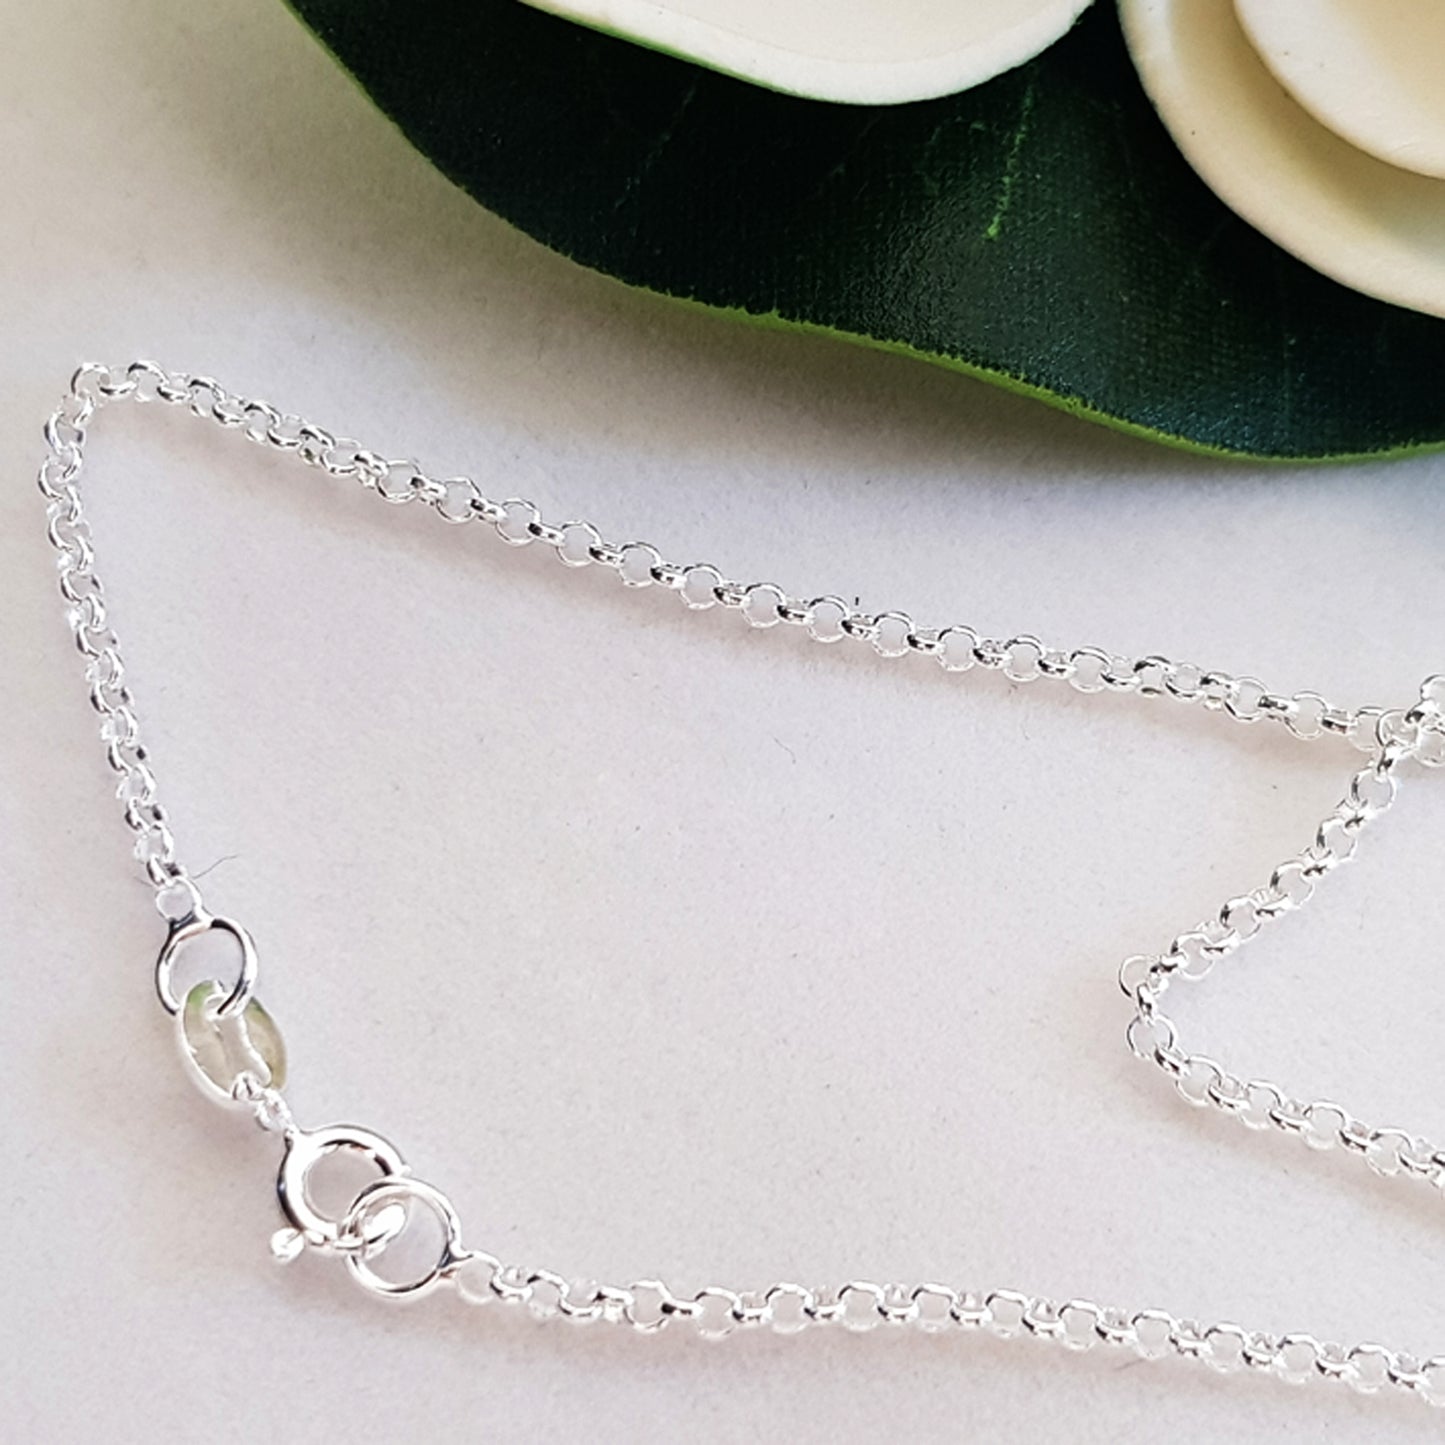 Chains - Rolo Chain Genuine Sterling Silver Finished | SS-FChainRollo | Jewellery Making Supply